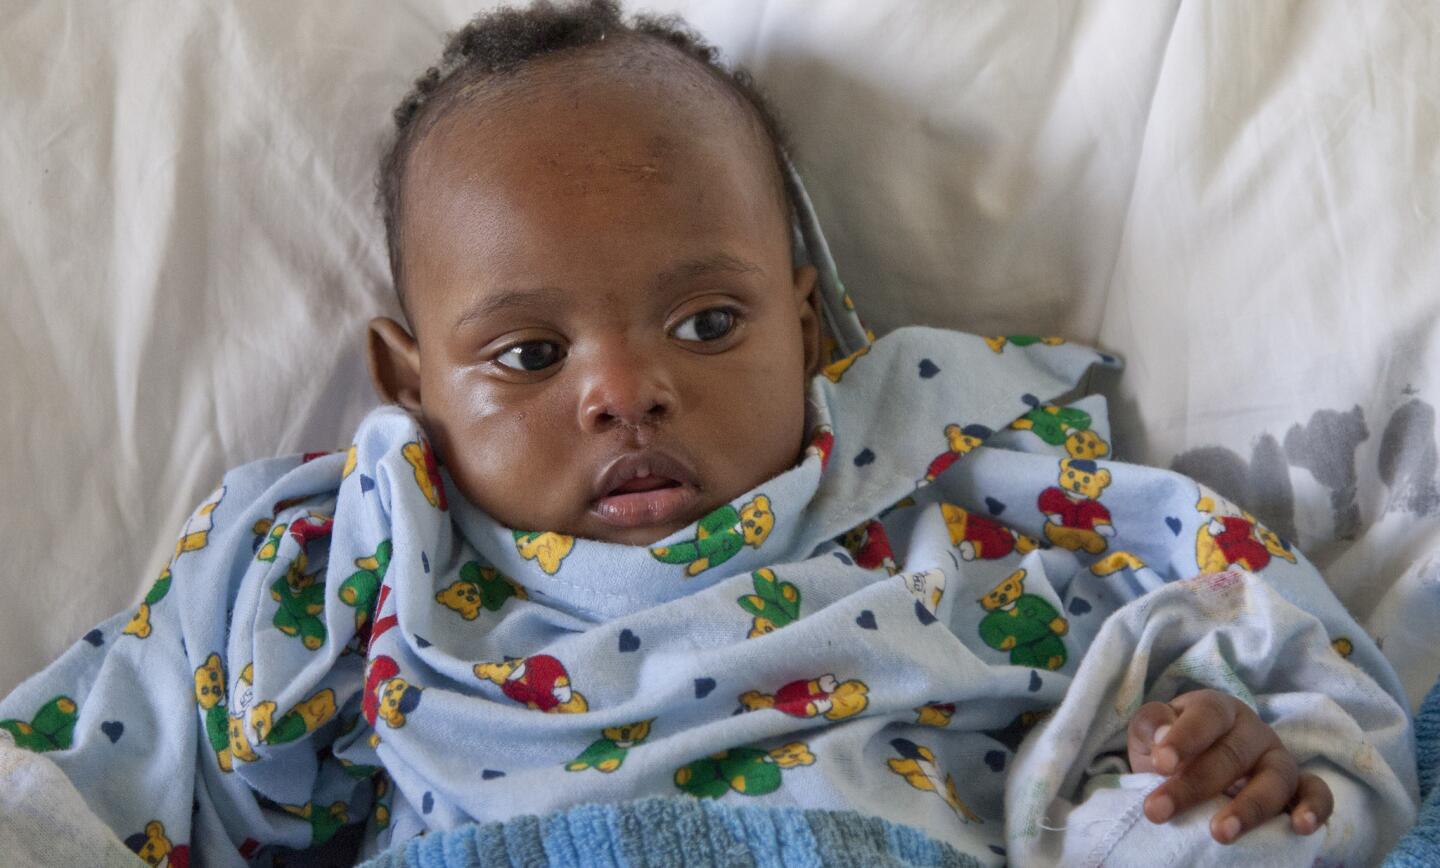 Dealeryn Saisi Wasike, the baby girl rescued early Tuesday from the rubble of a collapsed building, lies in a hospital bed at Kenyatta National Hospital in Nairobi.